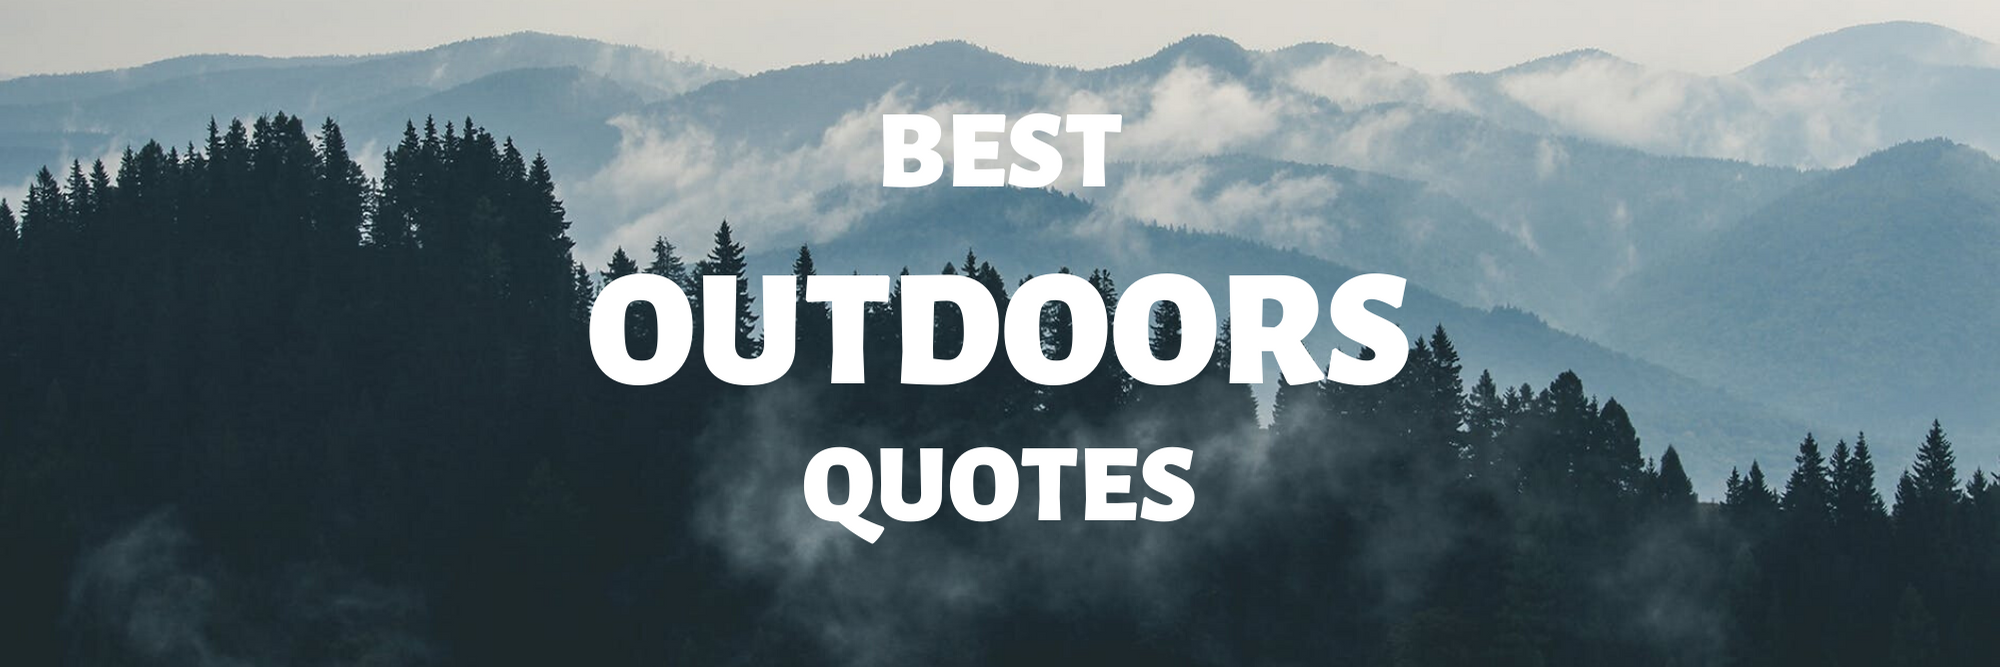 Outdoors quotes - EverybodyAdventures